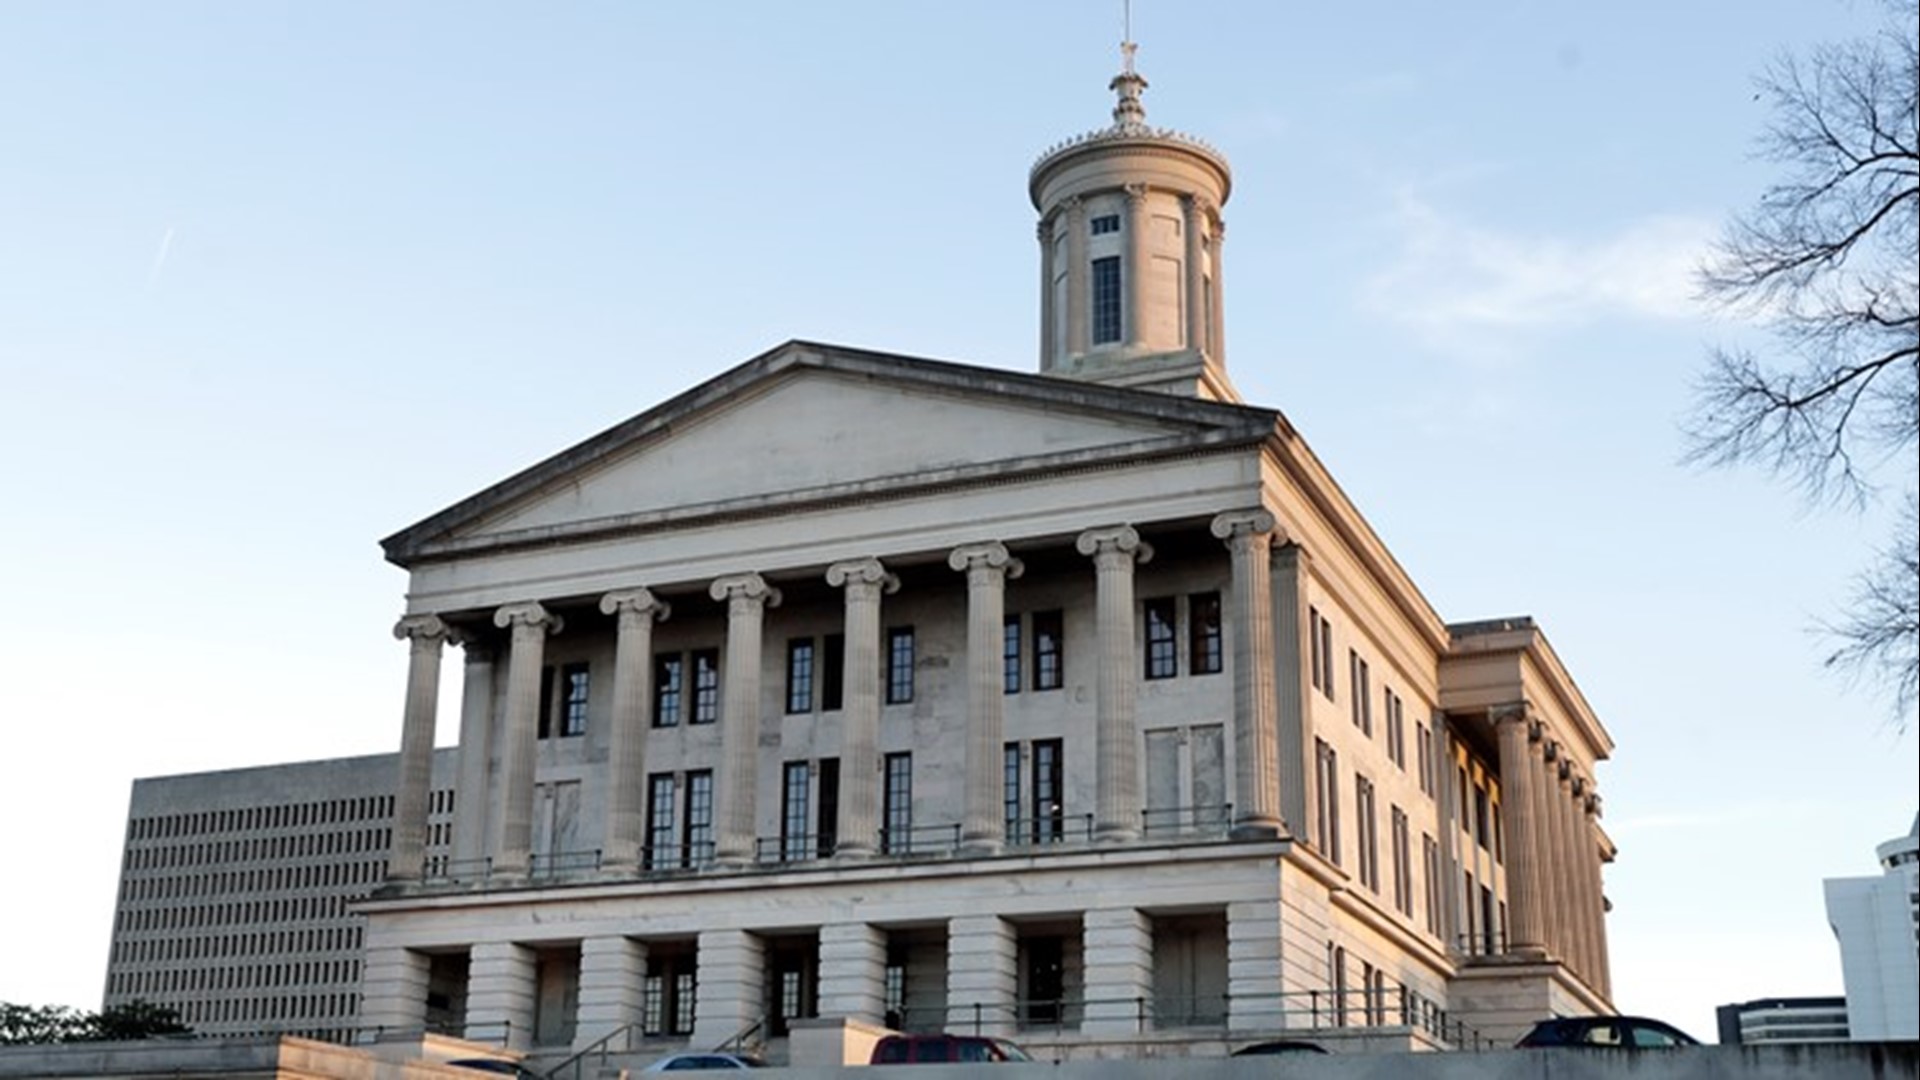 The day that a 28-year-old opened fire in an elementary school — killing 6 people — the Tennessee Legislature cancelled all business at the state capitol.